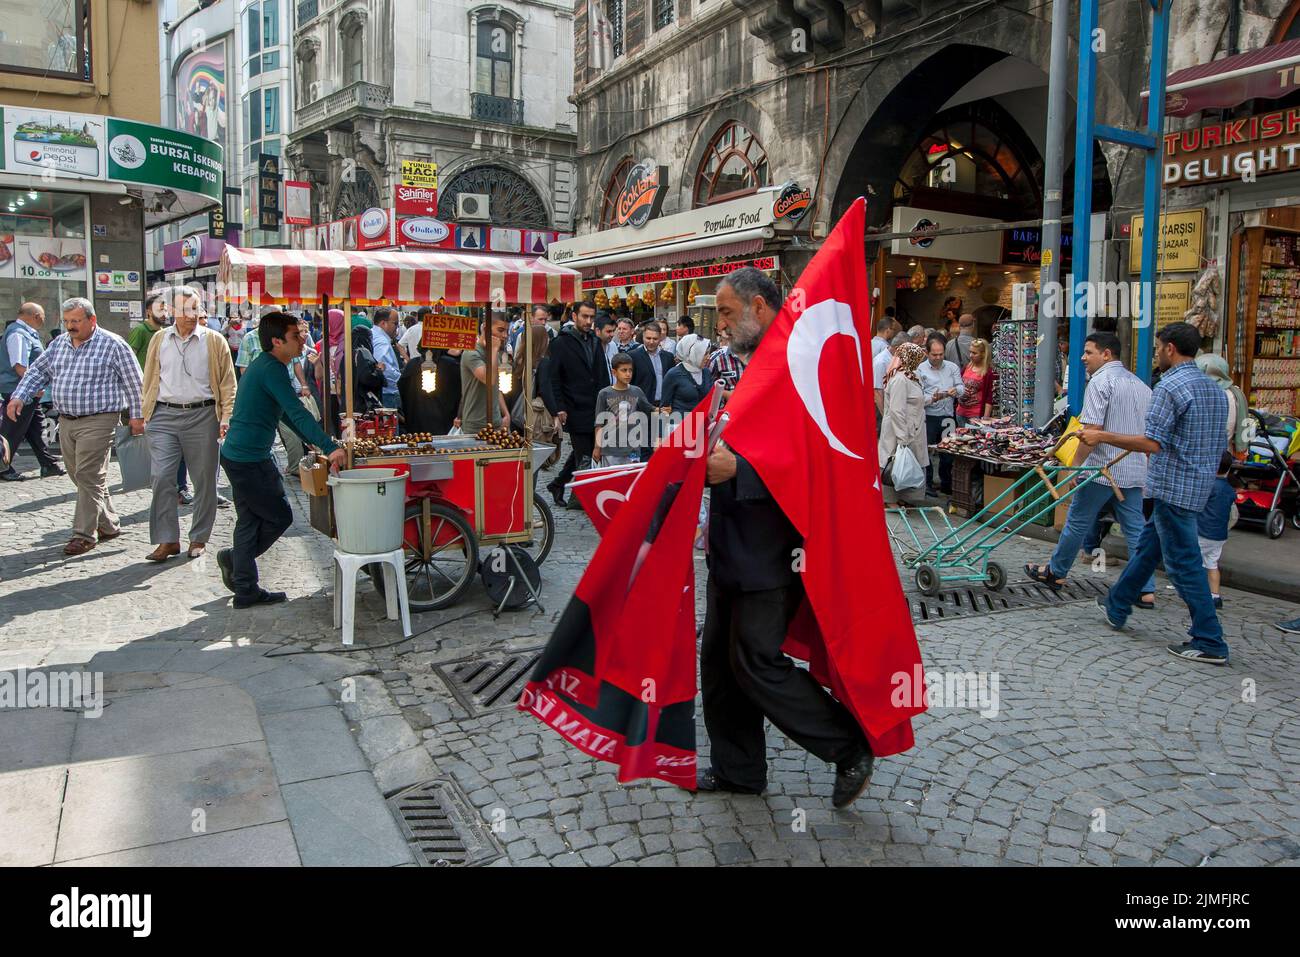 A busy street scene outside the entrance to the Spice Bazaar in the Eminonu district of Istanbul in Turkey. Stock Photo